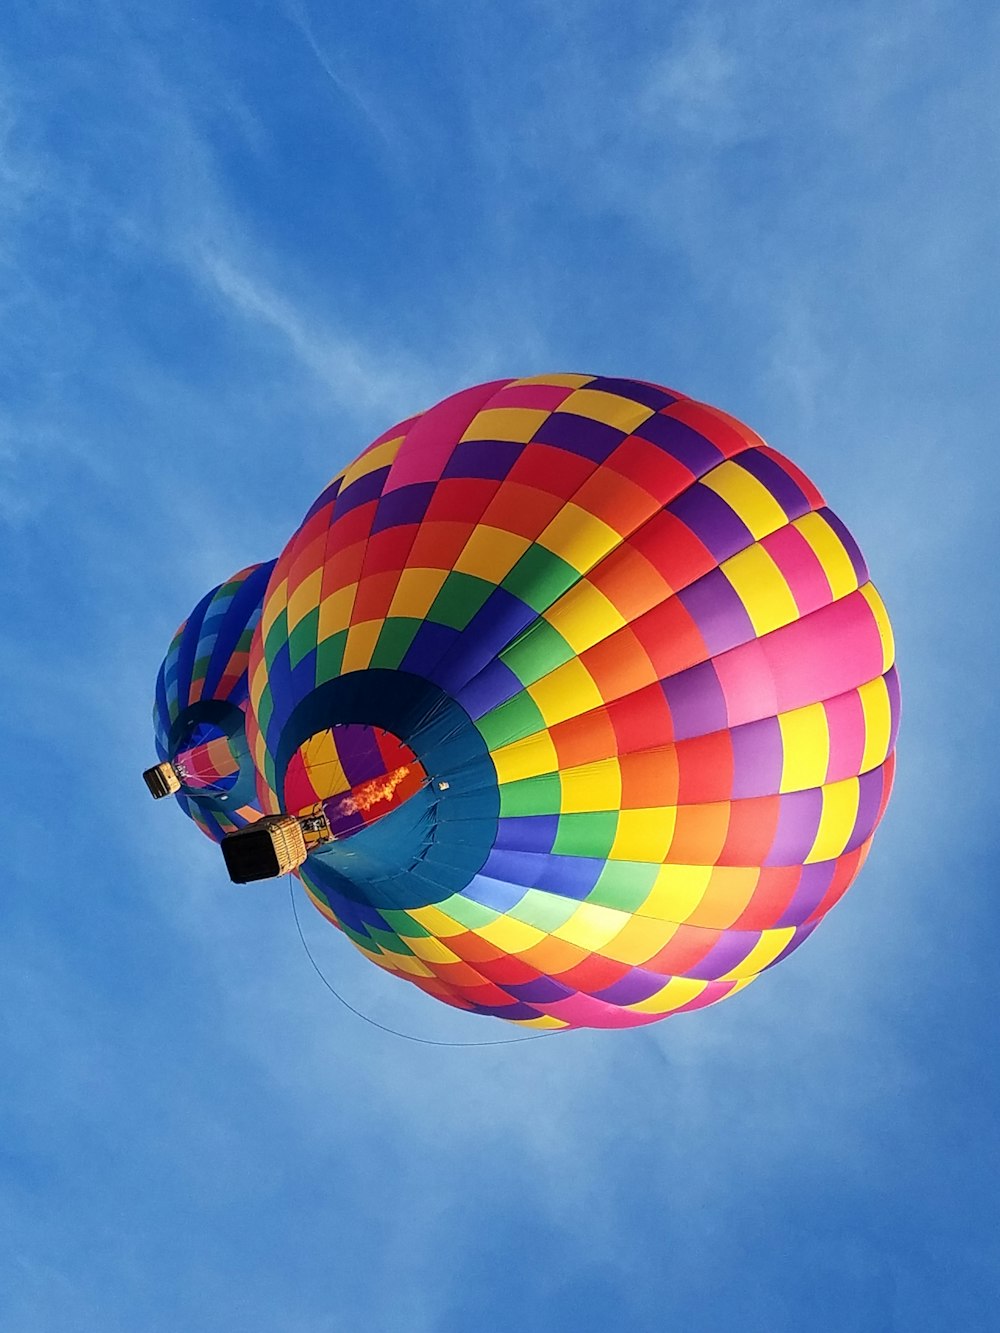 blue yellow and red hot air balloon